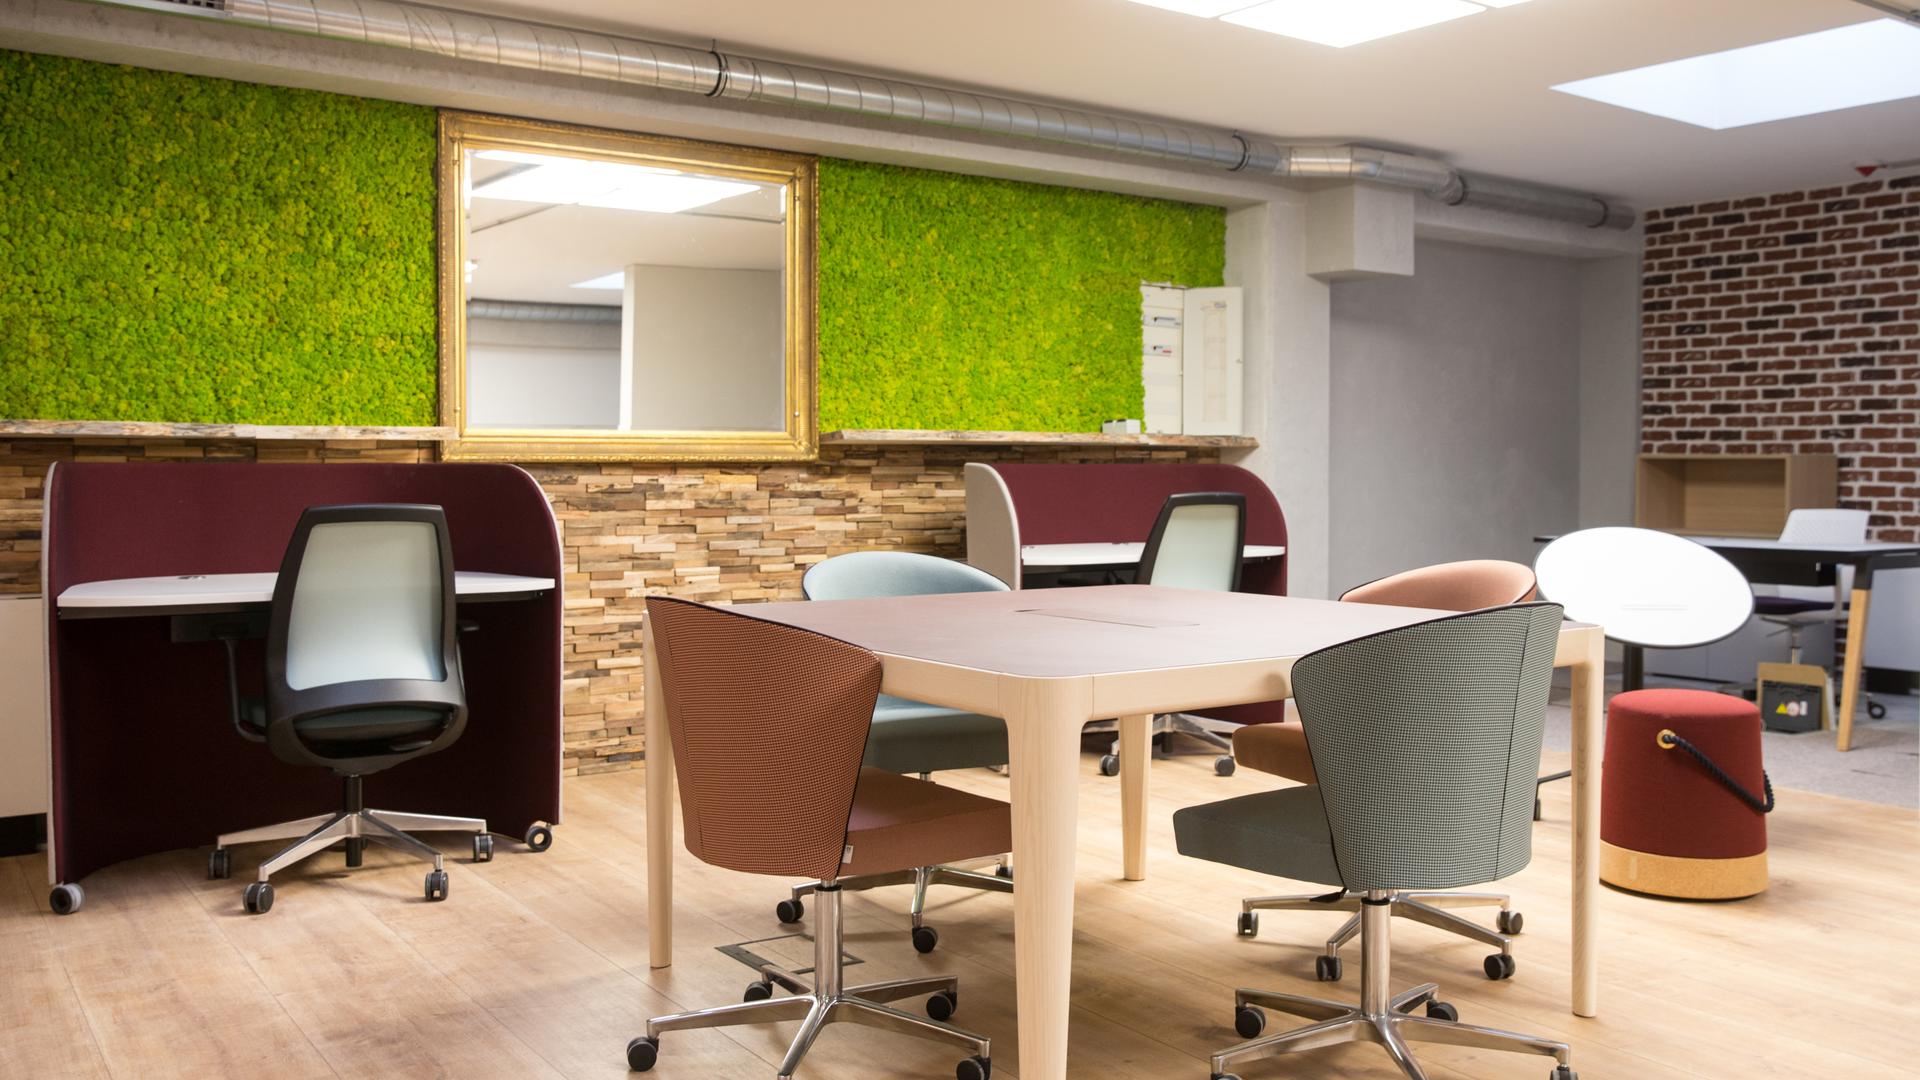 Co-working spaces are often networking hothouses for those starting up a business.